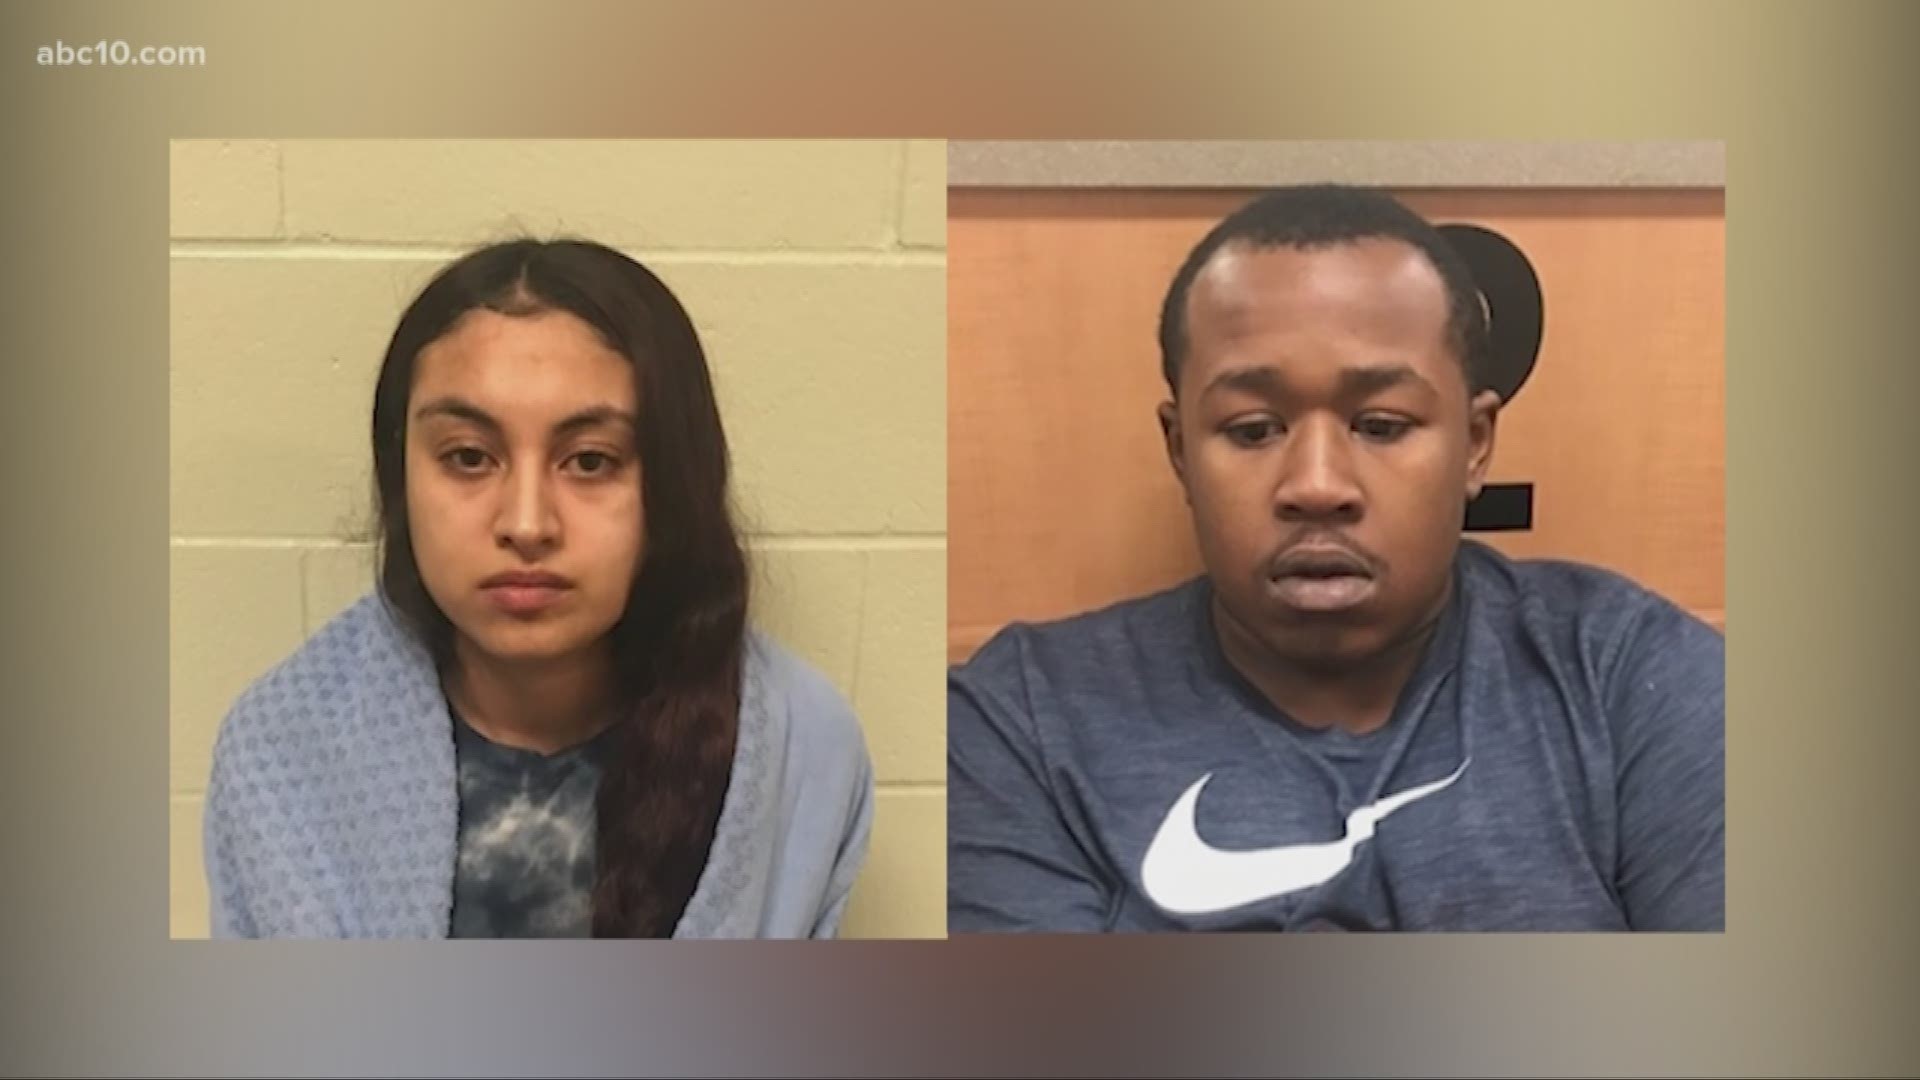 The Rocklin Police Department arrested Mia Gonzalez, 18, Larry Smith, 20,  in connection to the burglary of 75 cars, officials said.